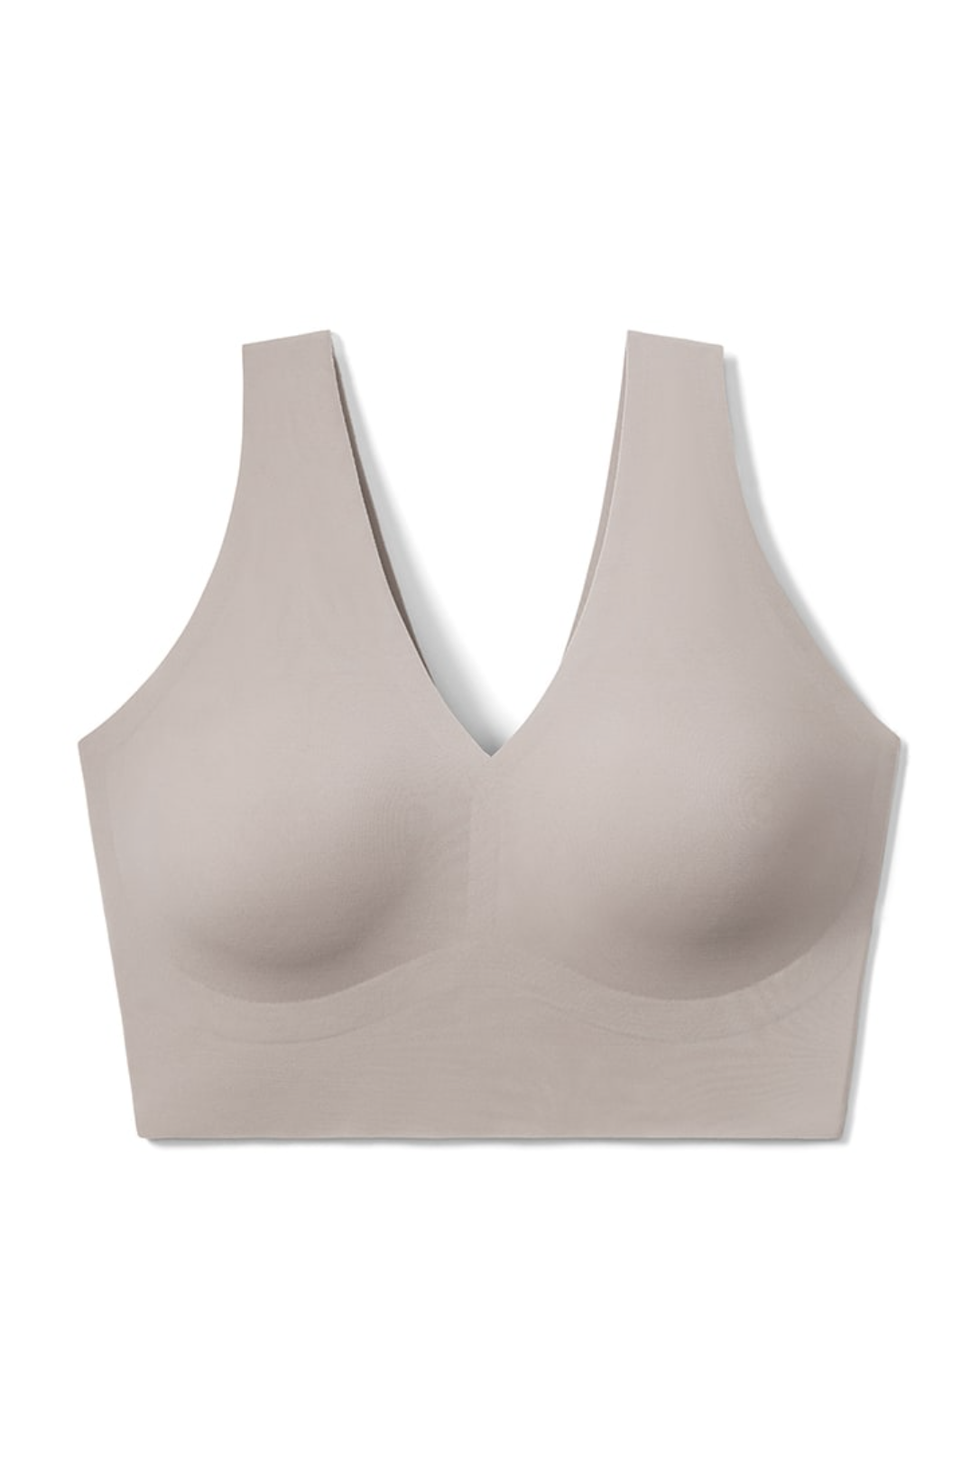 This 'soft and soothing' Nordstrom bra is on a crazy deal during the  Anniversary Sale